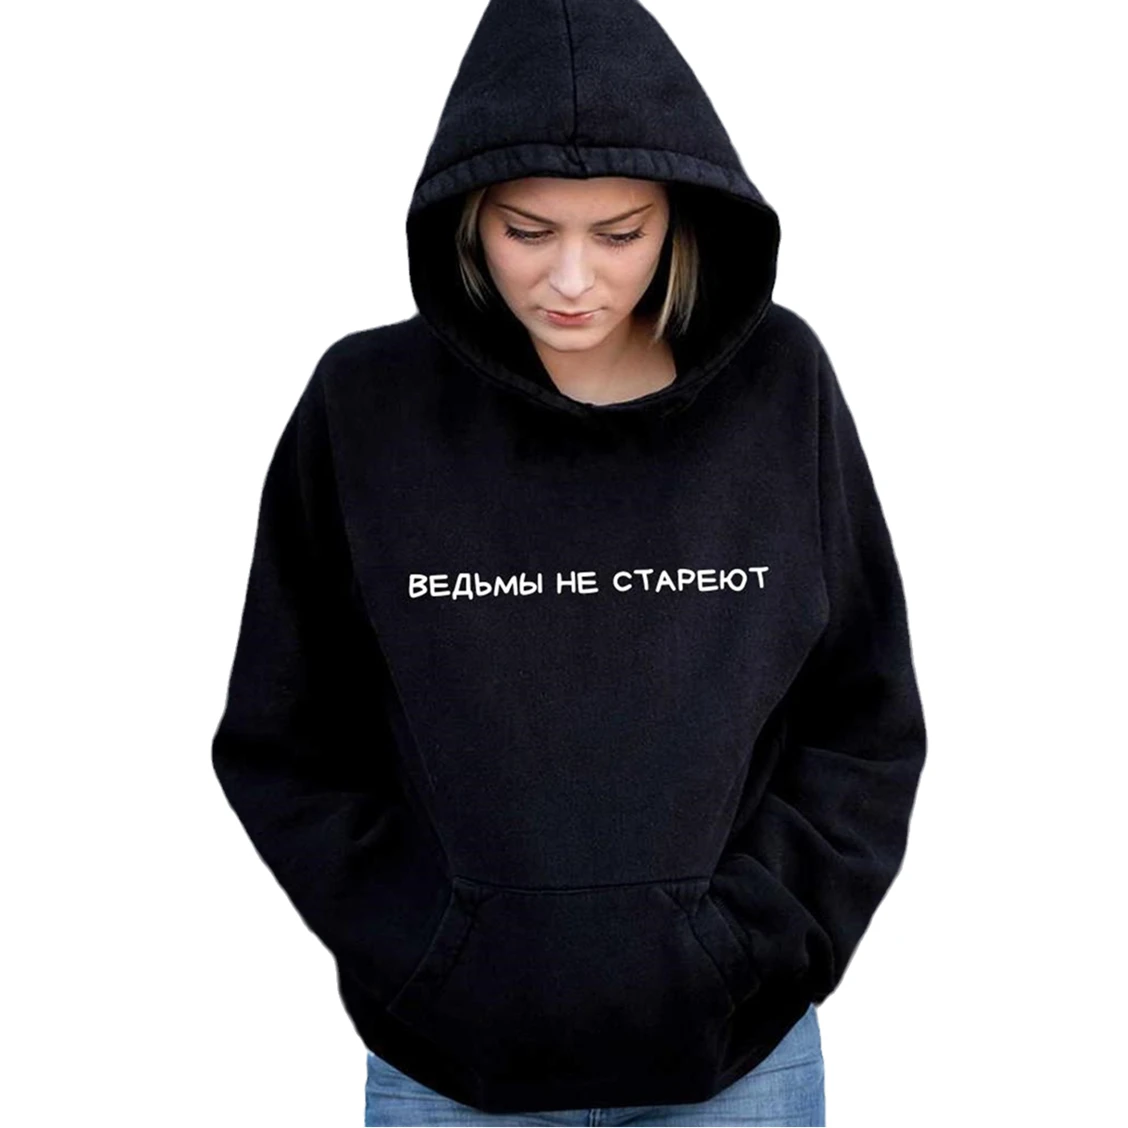 

Porzingis Female Hoodies With Russian Inscriptions Ведьмы не стареют Fashion Winter Tops